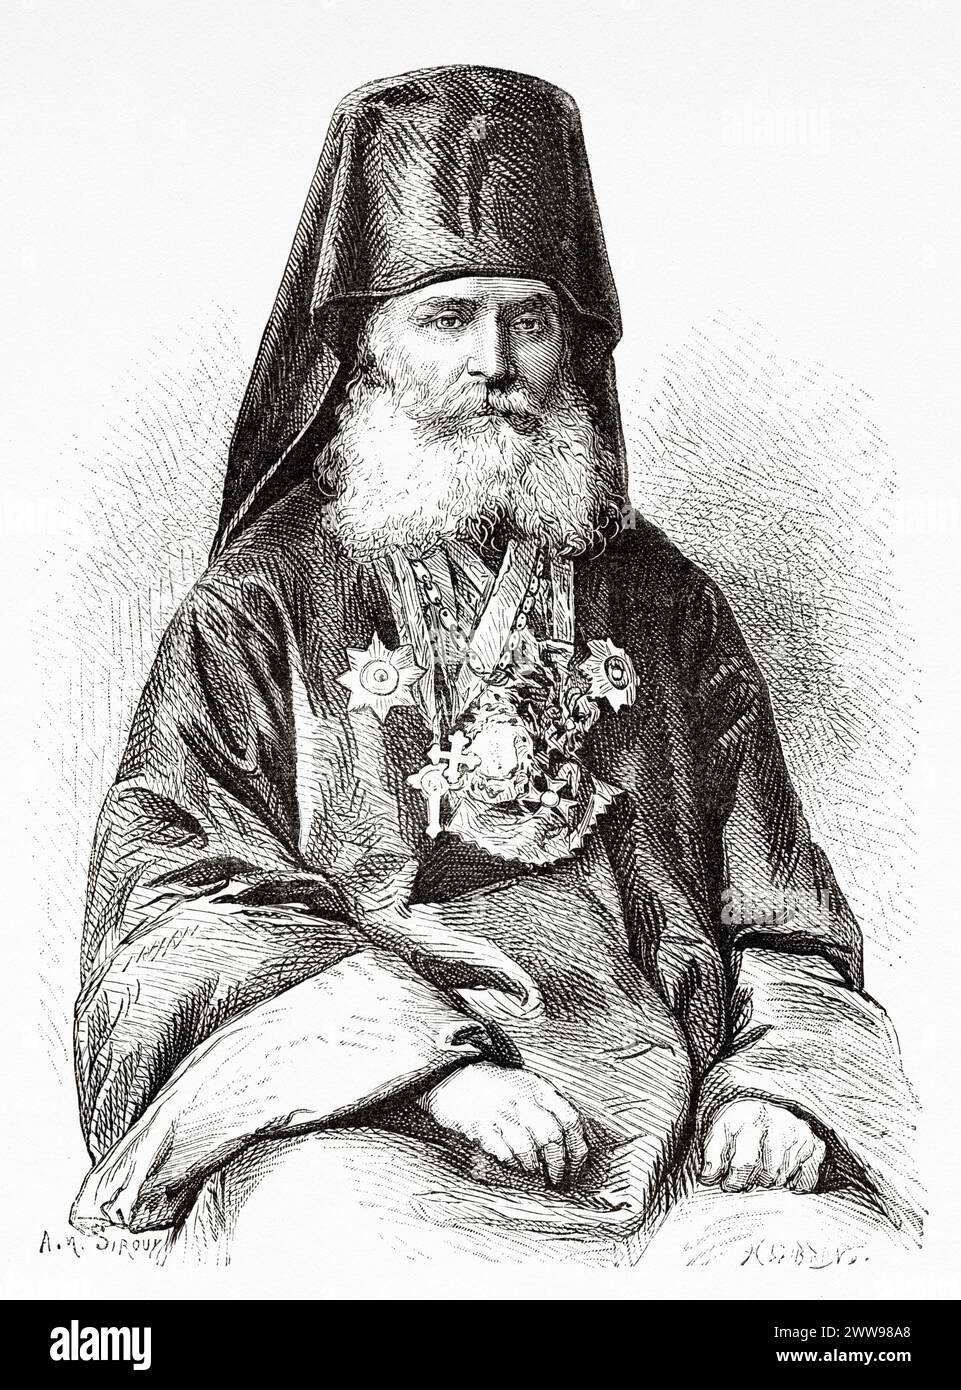 The Bishop of Imereti, Georgia. Eastern Europe.  Drawing by Achille Sirouy (1834 - 1904) Excursions in the Caucasus. From the Black Sea to the Caspian Sea 1875-1876 by Madame Clara Serena (1820 - 1884) Le Tour du Monde 1880 Stock Photo